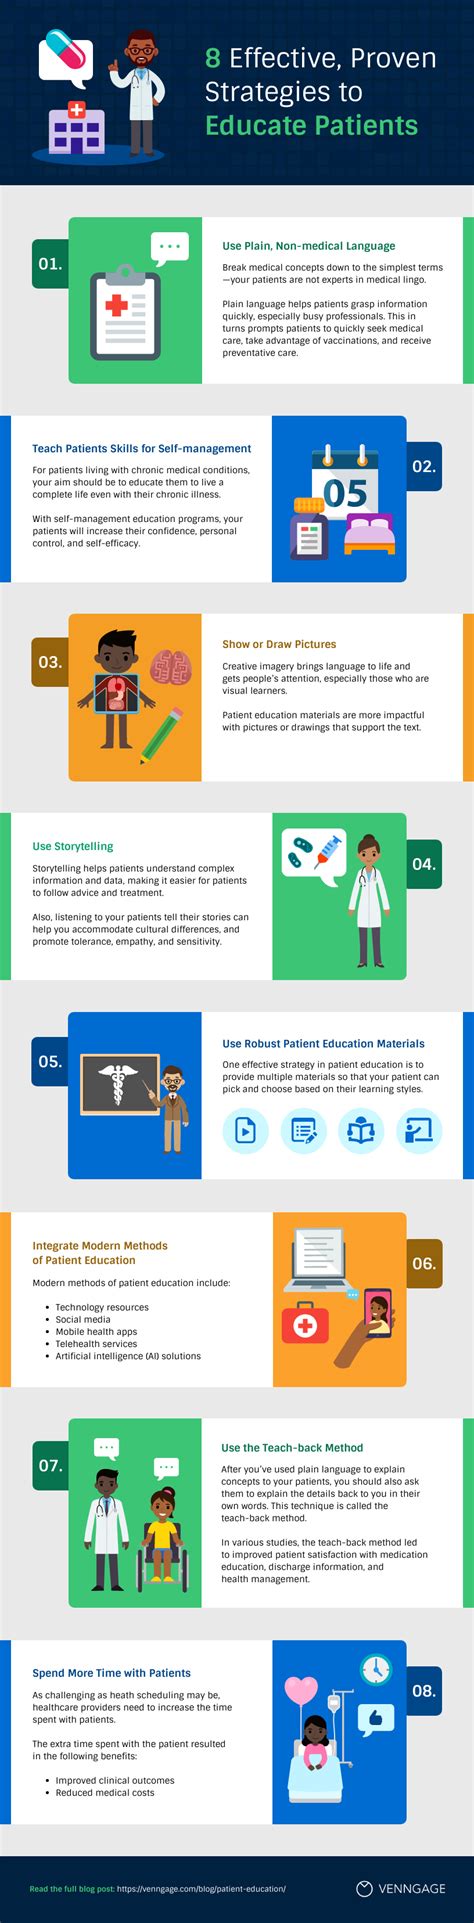 8 Strategies To Educate Patients List Infographic Venngage